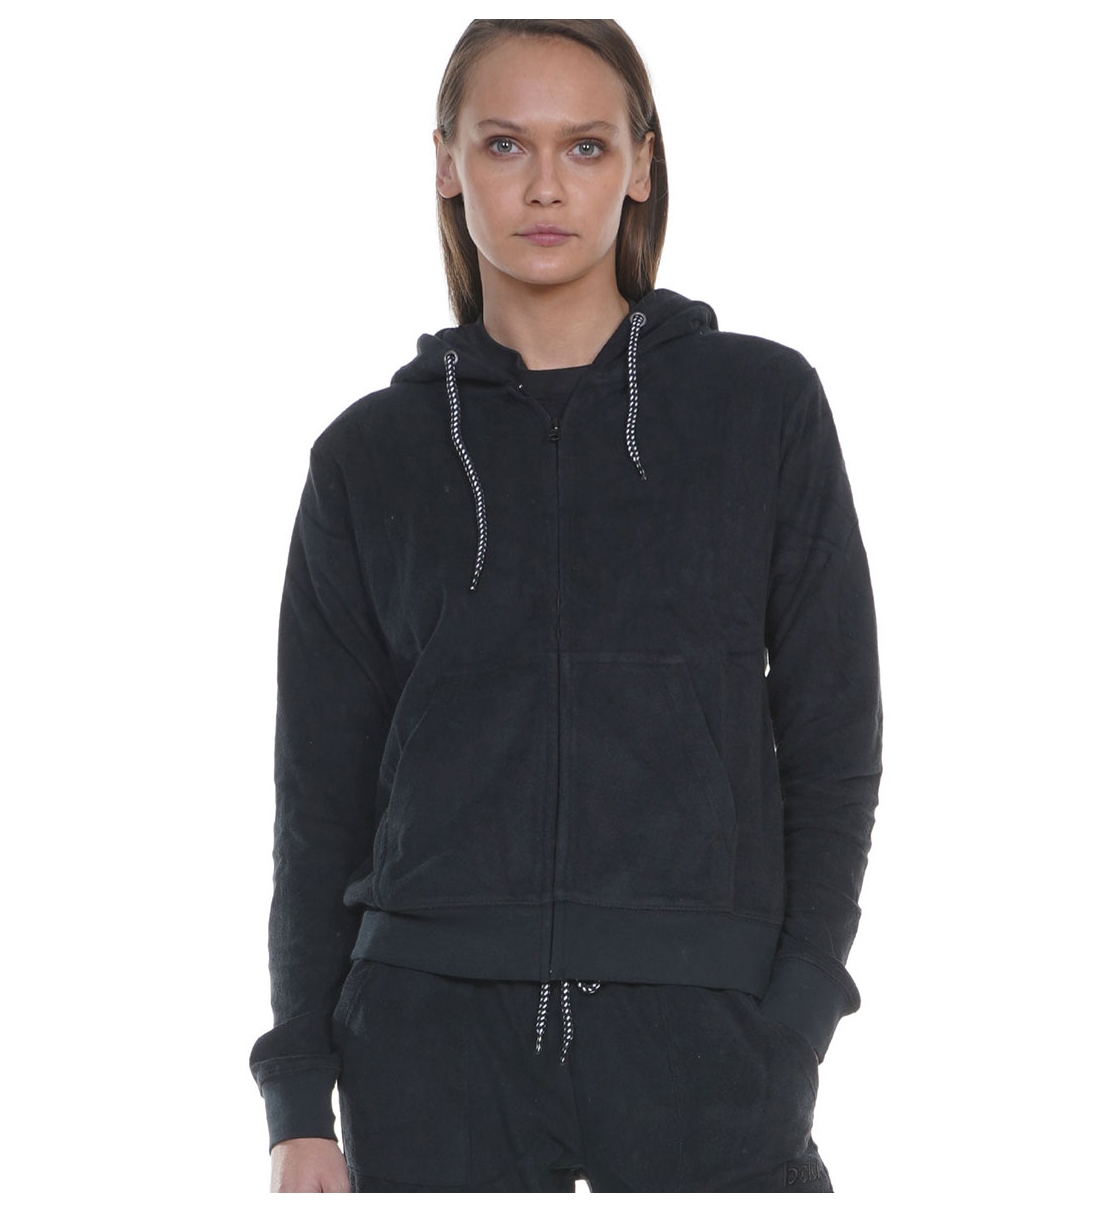 Body Action Ss22 Women'S Terry Hoodie Jacket